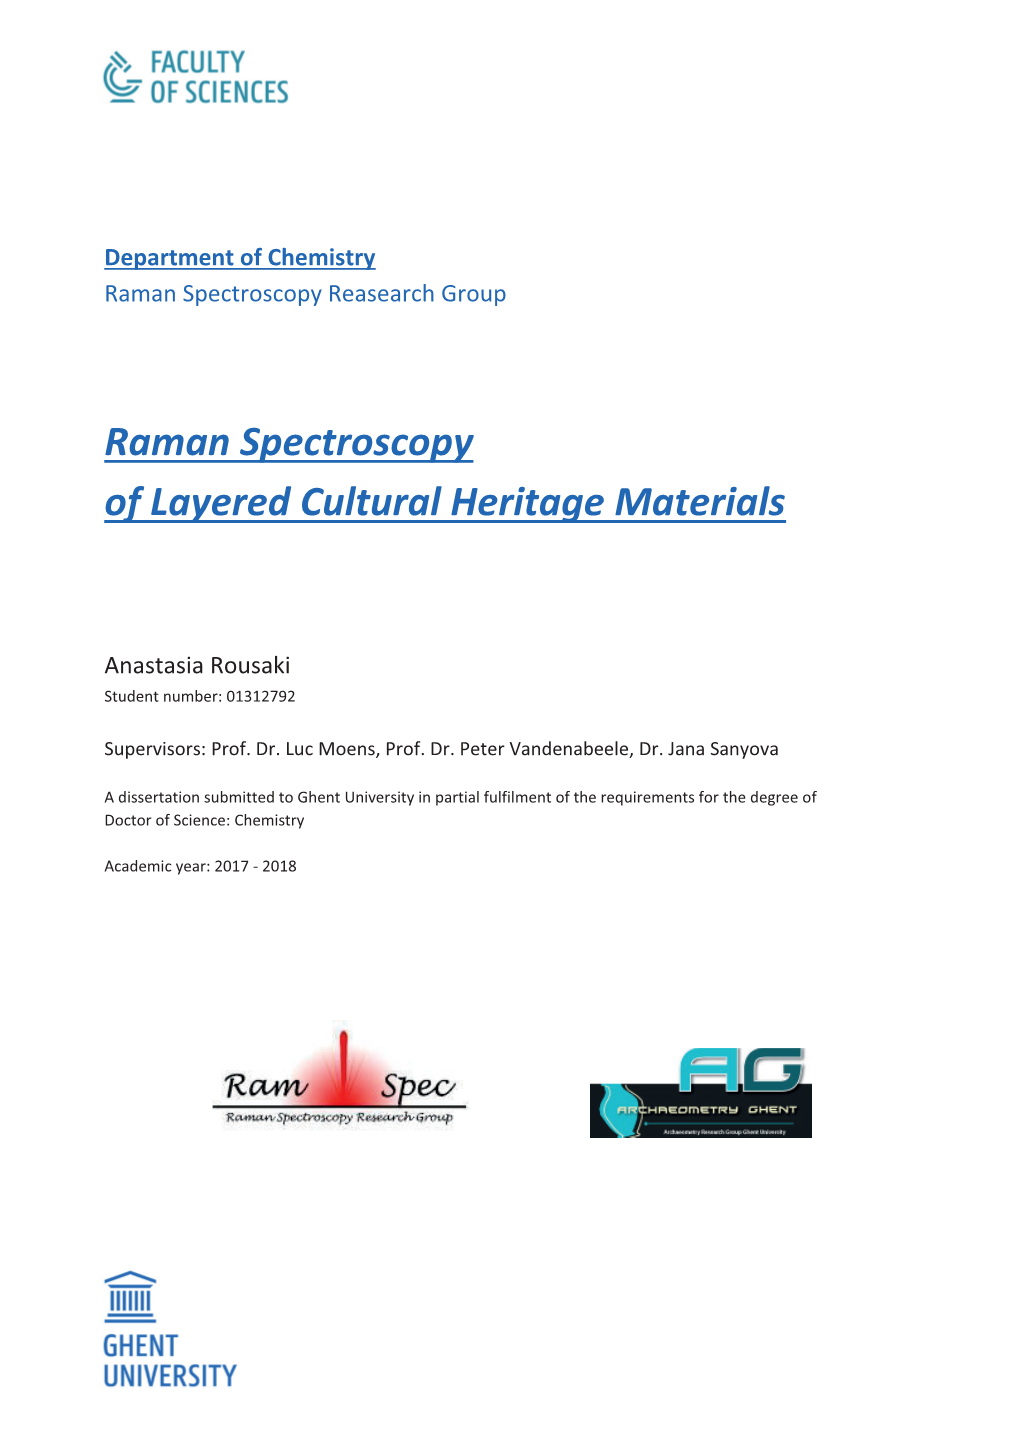 Raman Spectroscopy of Layered Cultural Heritage Materials